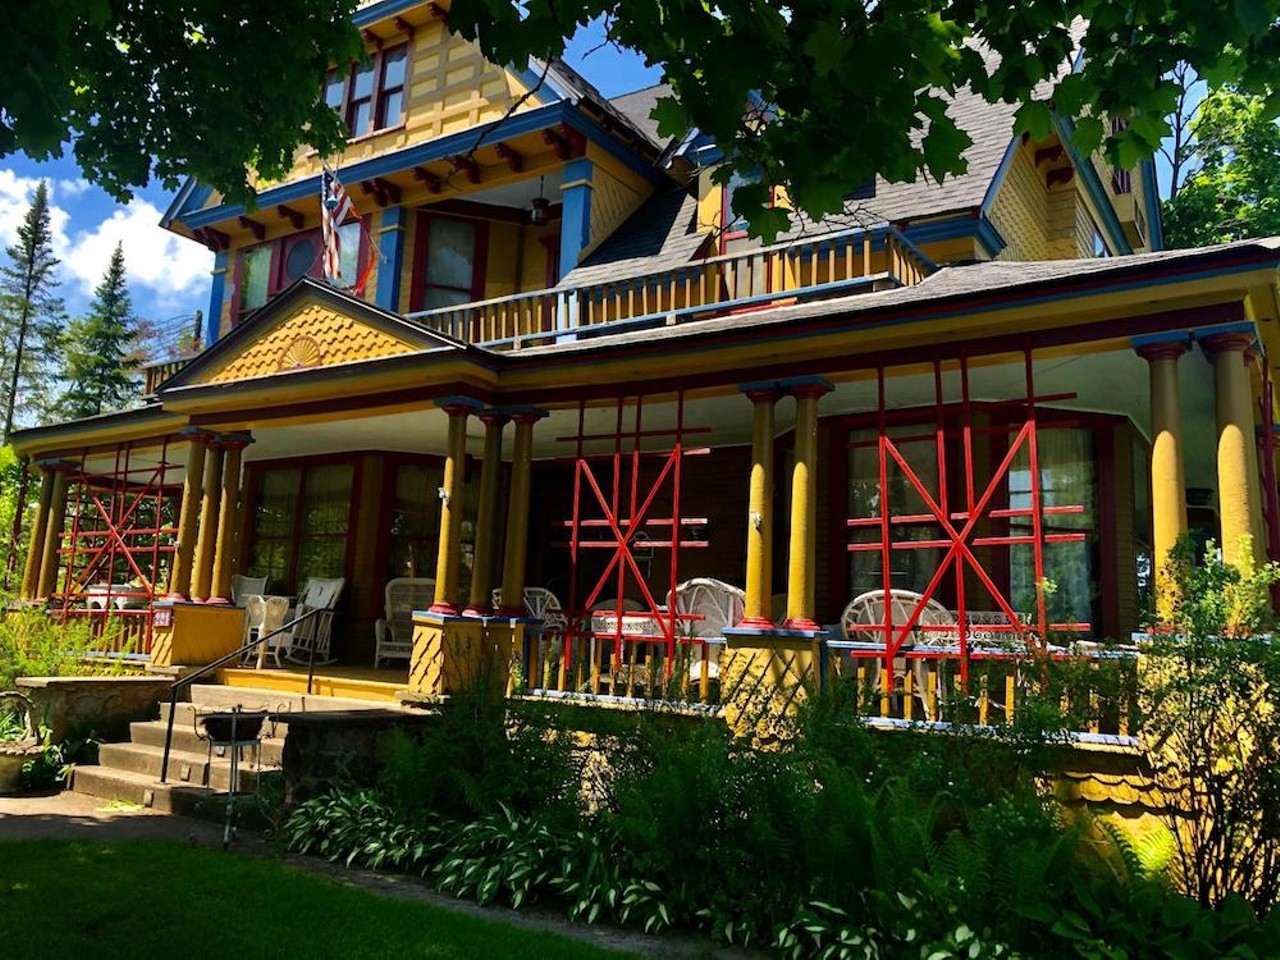 This historic 1896 Victorian home in Gaylord is $425k and is basically grandma's house on steroids &#151; and we want cookies